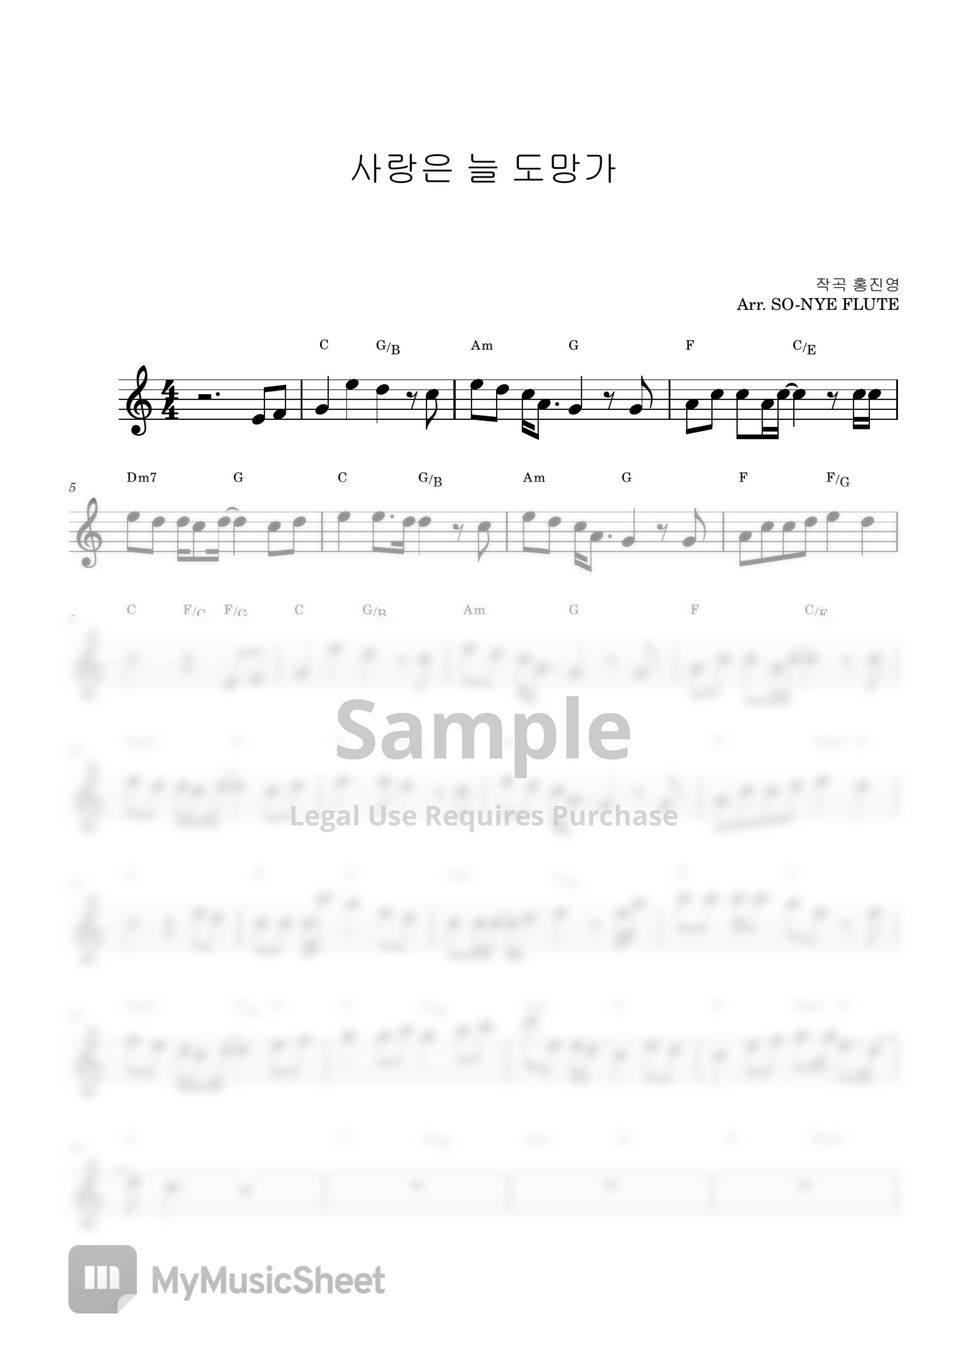 Lim Young Woong 임영웅 - Love Always Run Away 사랑은 늘 도망가 (Flute Sheet Music Easy) by sonye flute